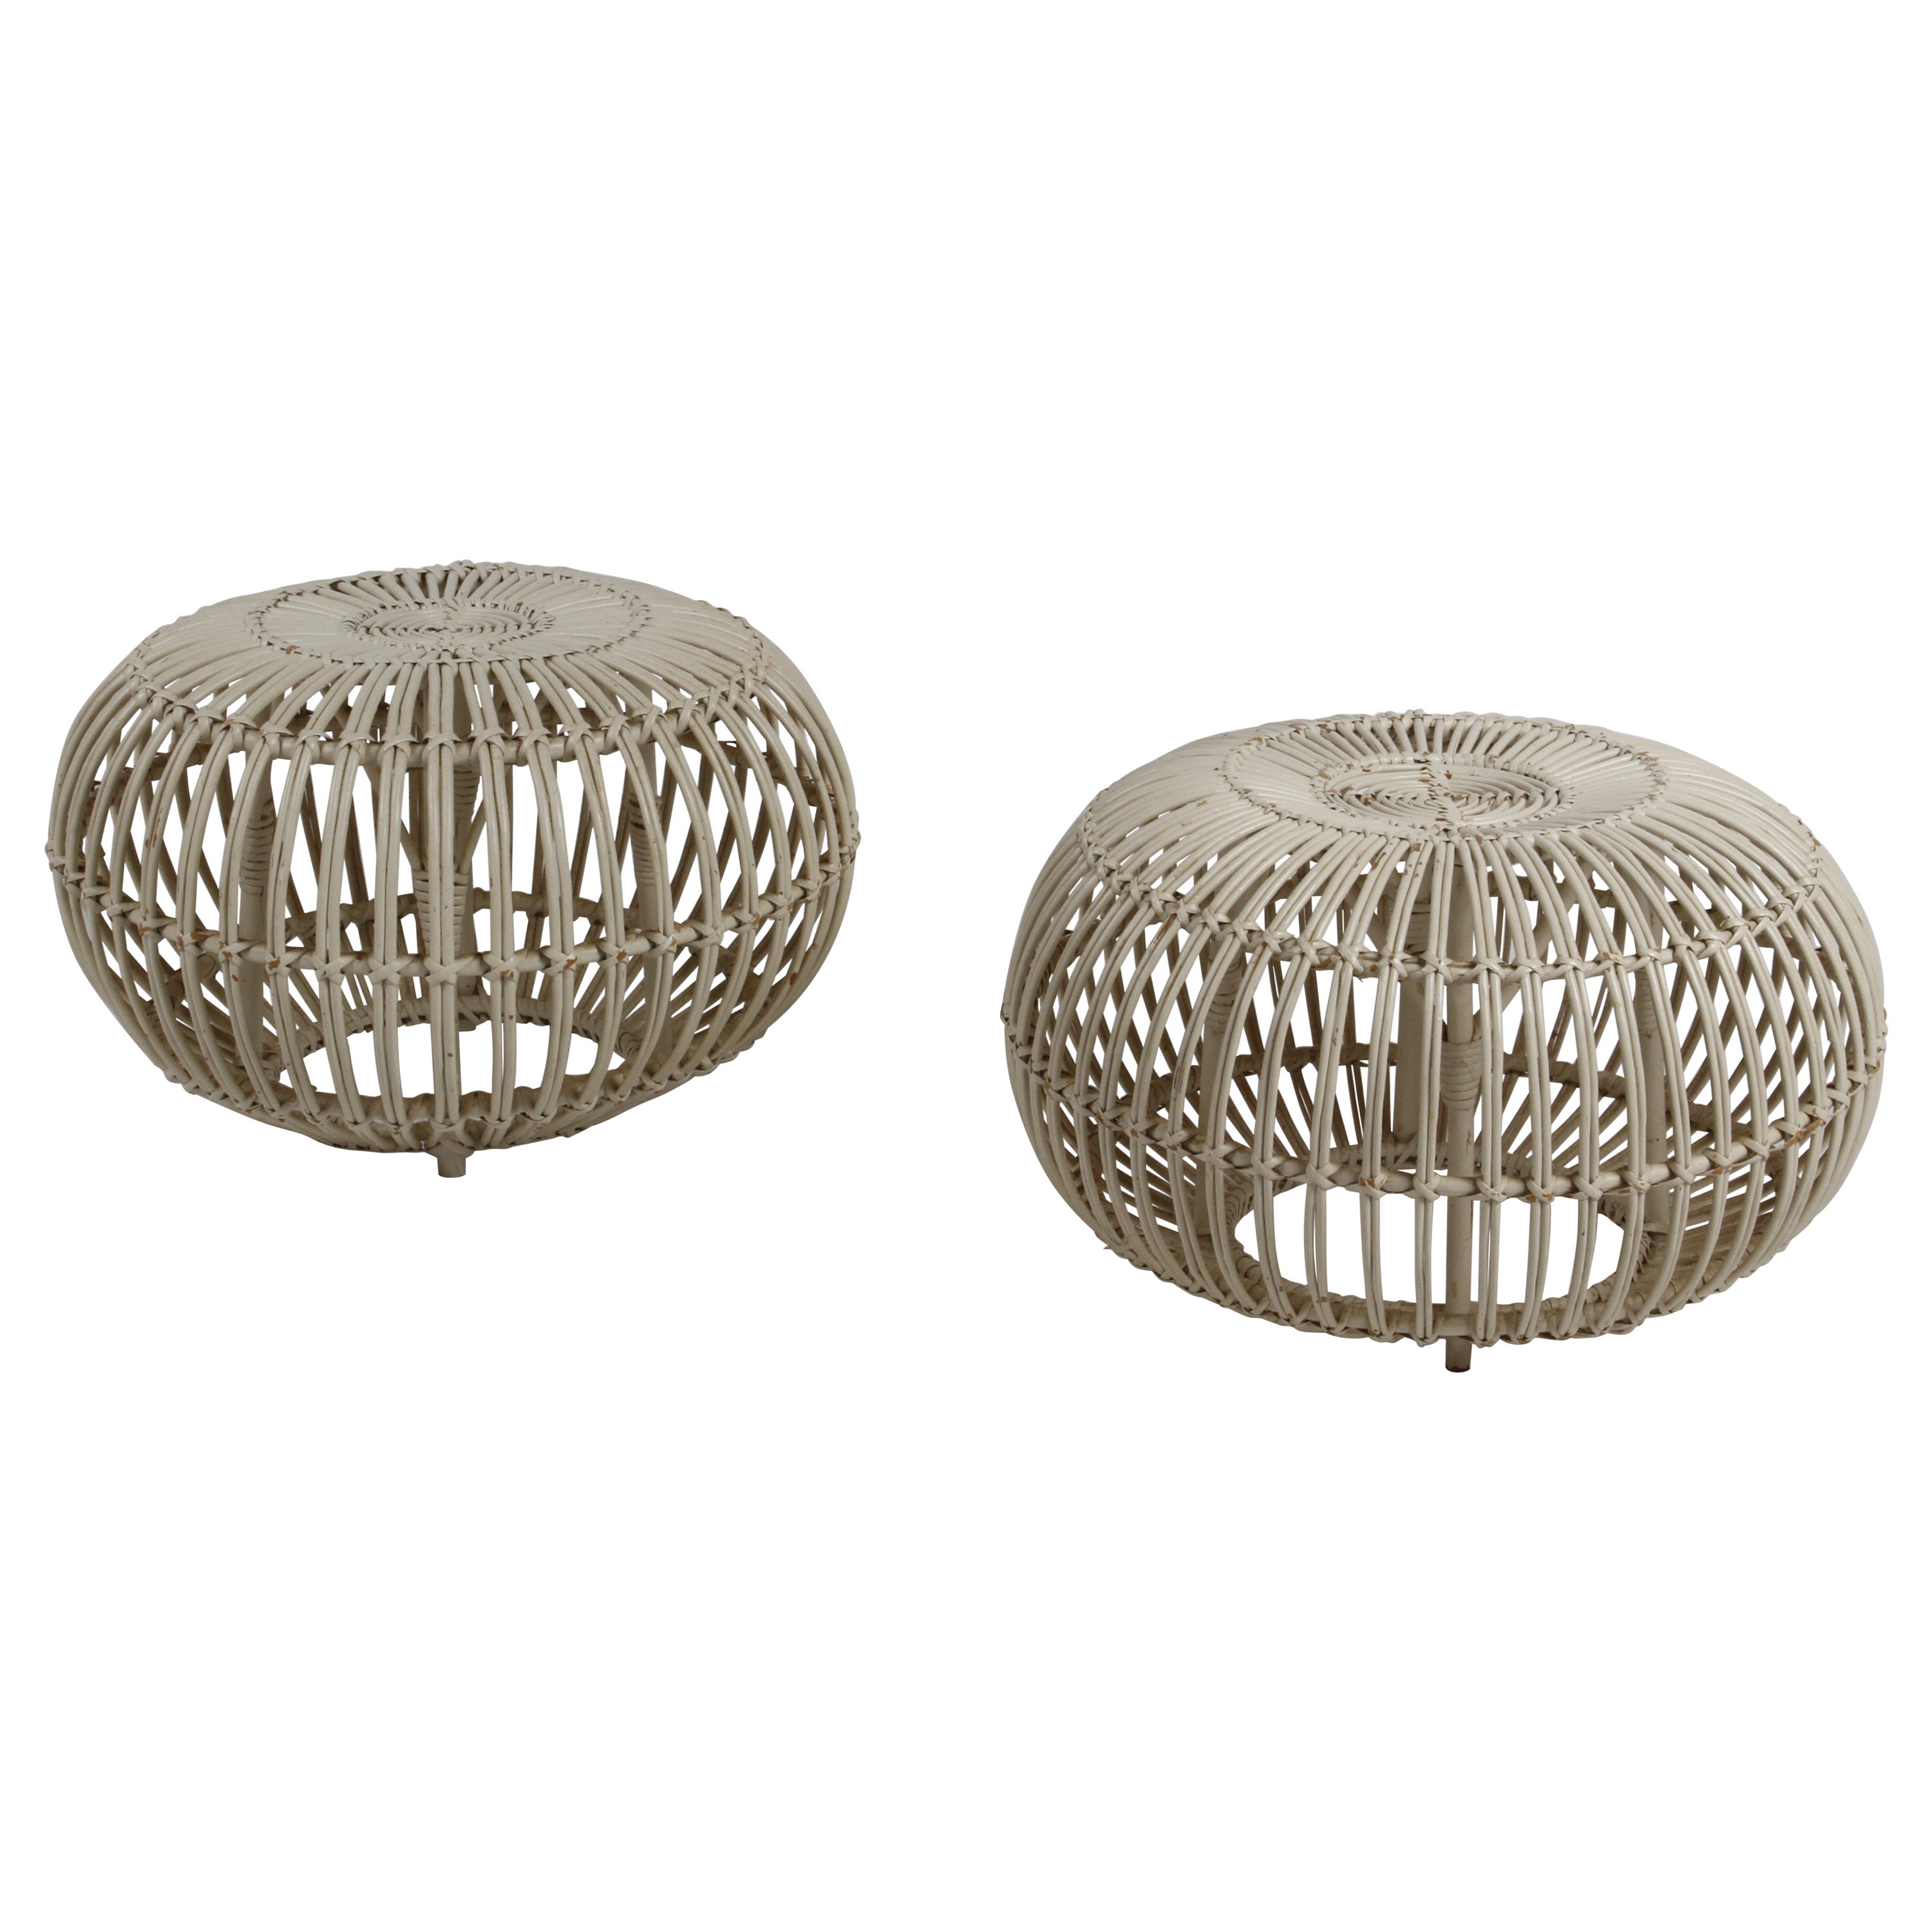 Pair of Mid-Century Modern Franco Albini White Wicker Ottomans, Stools or Poufs For Sale